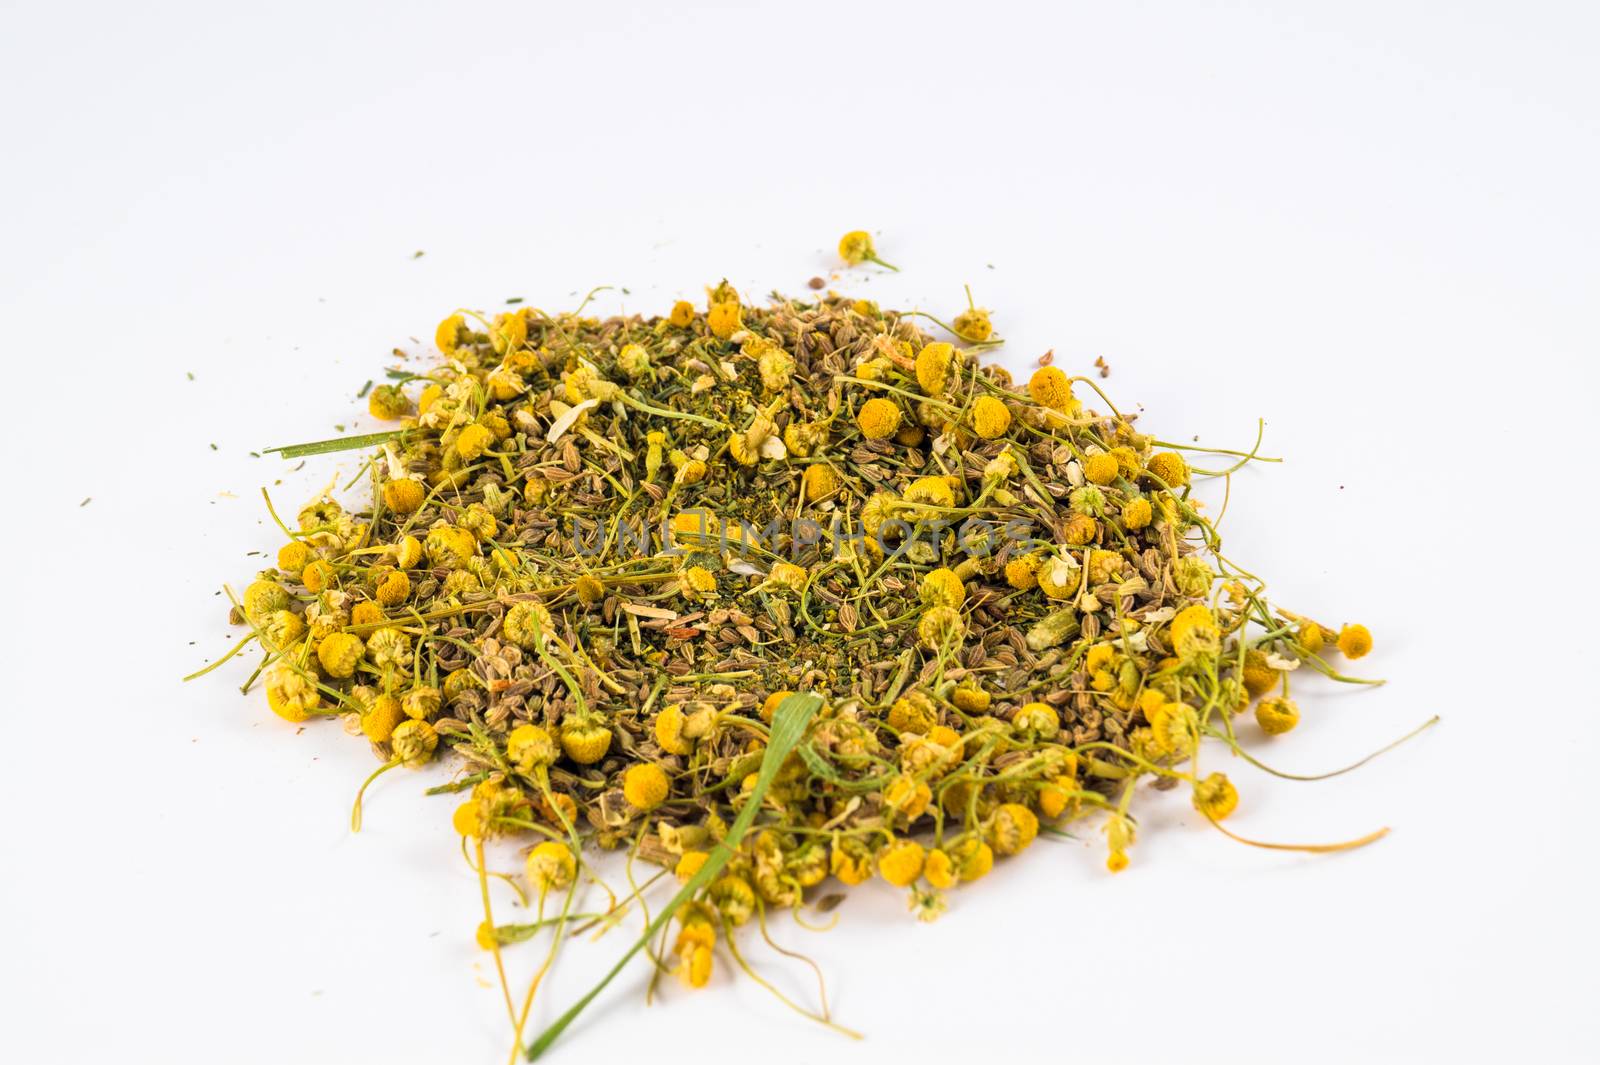 Herb mix in white background